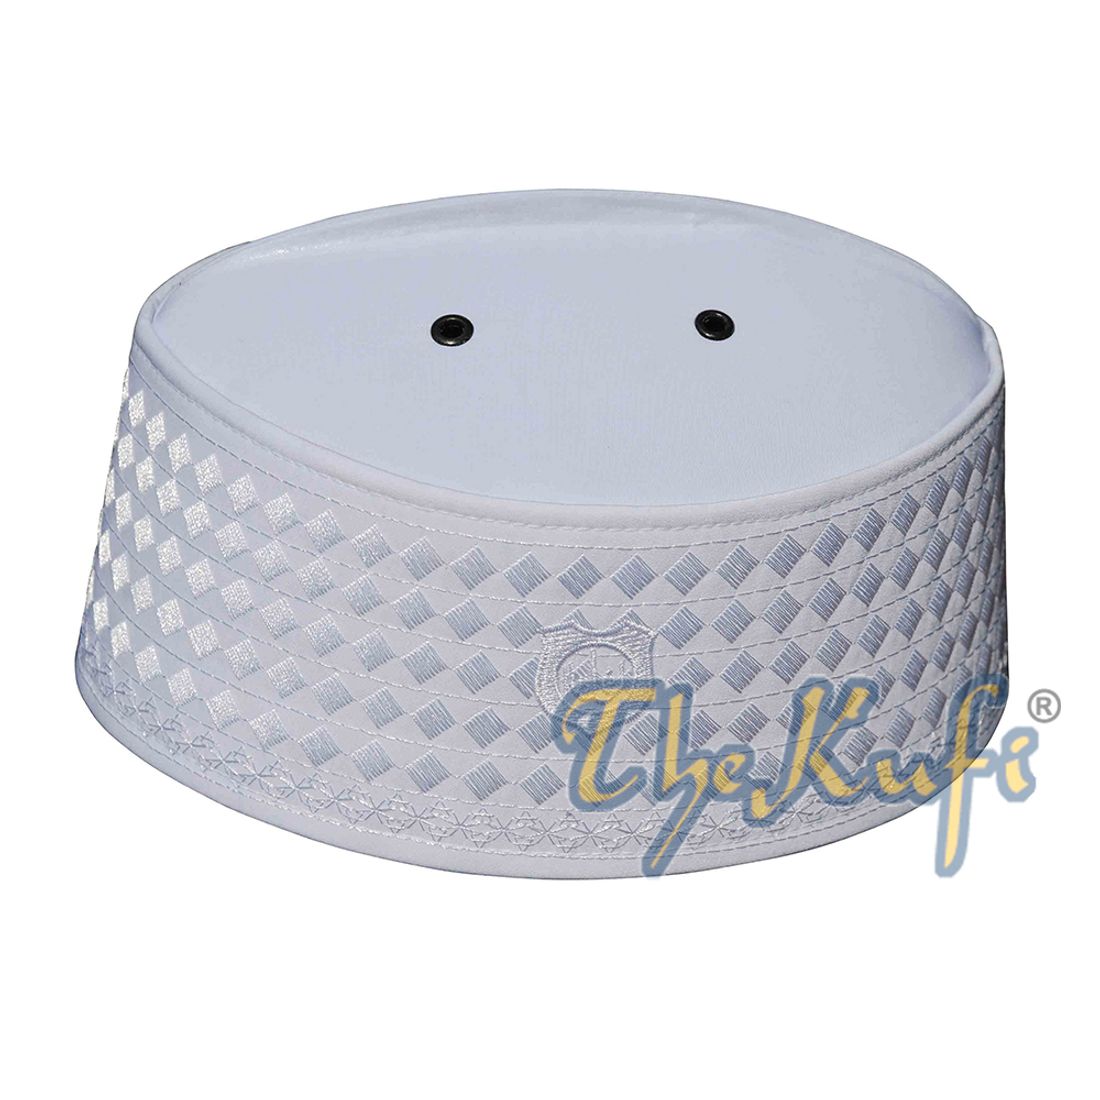 Exclusive Handcrafted White Rigid Embroidered Kufi